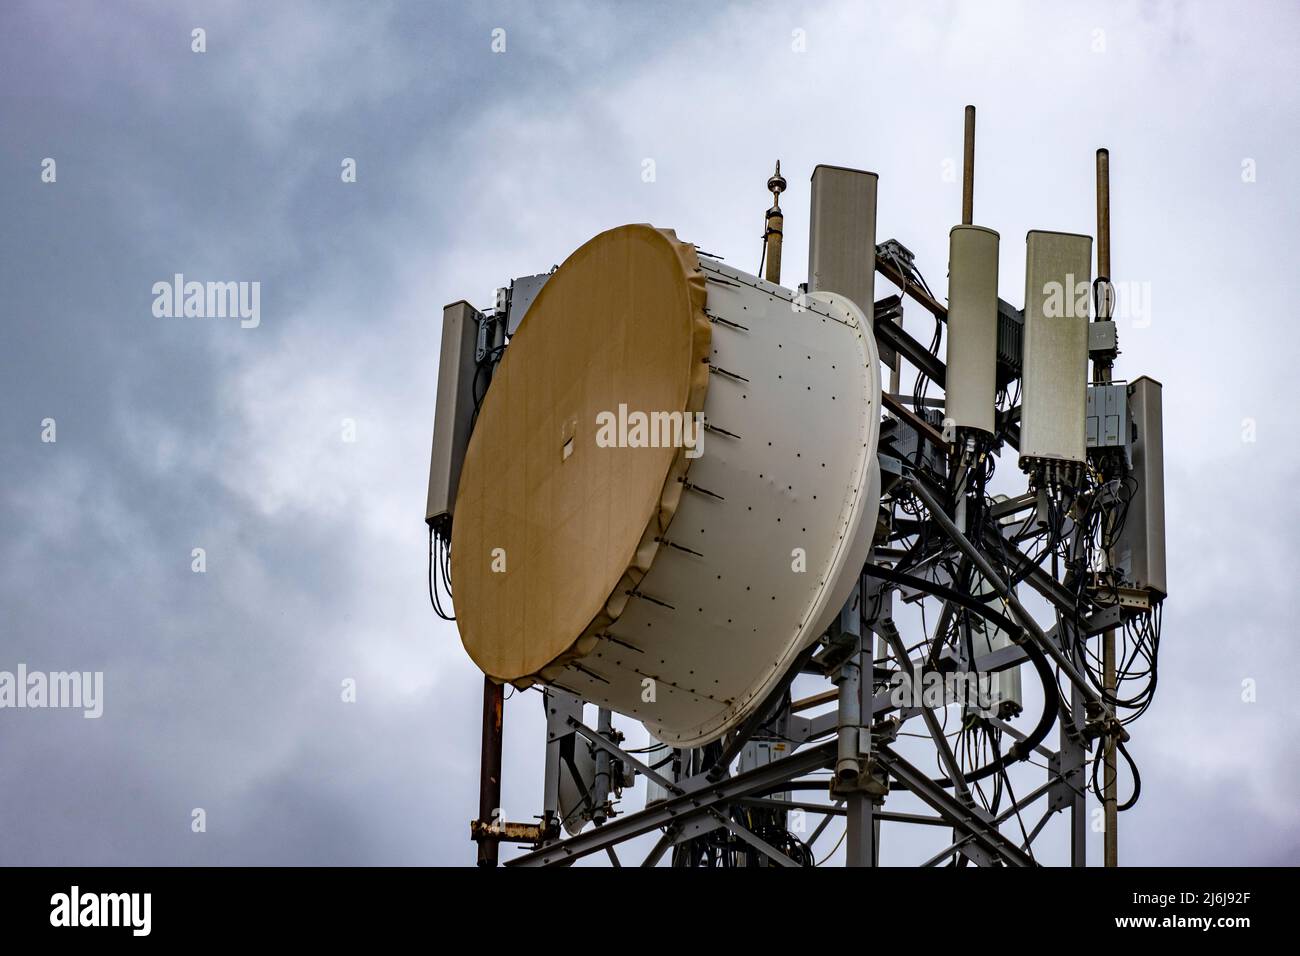 Bass drum style microwave antennas on tall tower. 5G Cellular communication for mobile phone and video data transmission. Telecommunication point Stock Photo